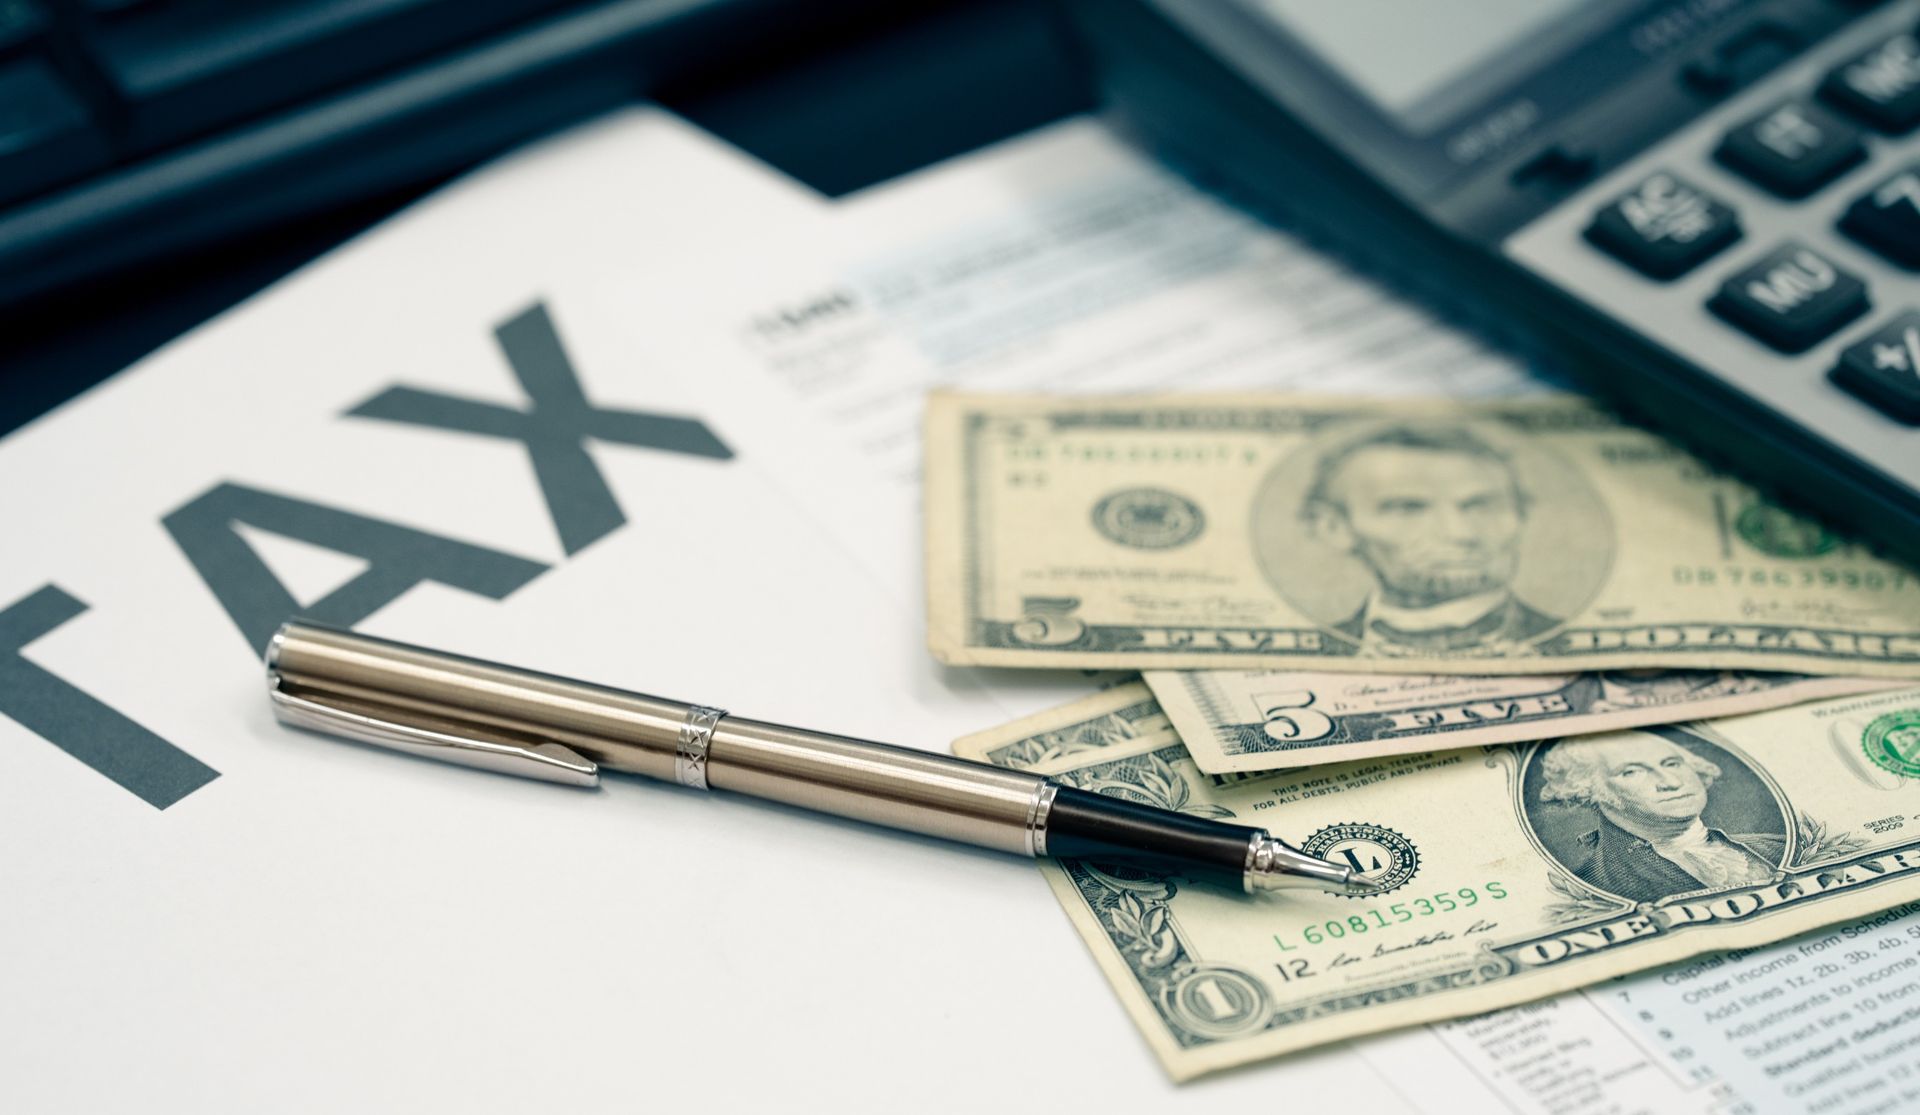 Steps to Take Before You File Your Business Taxes